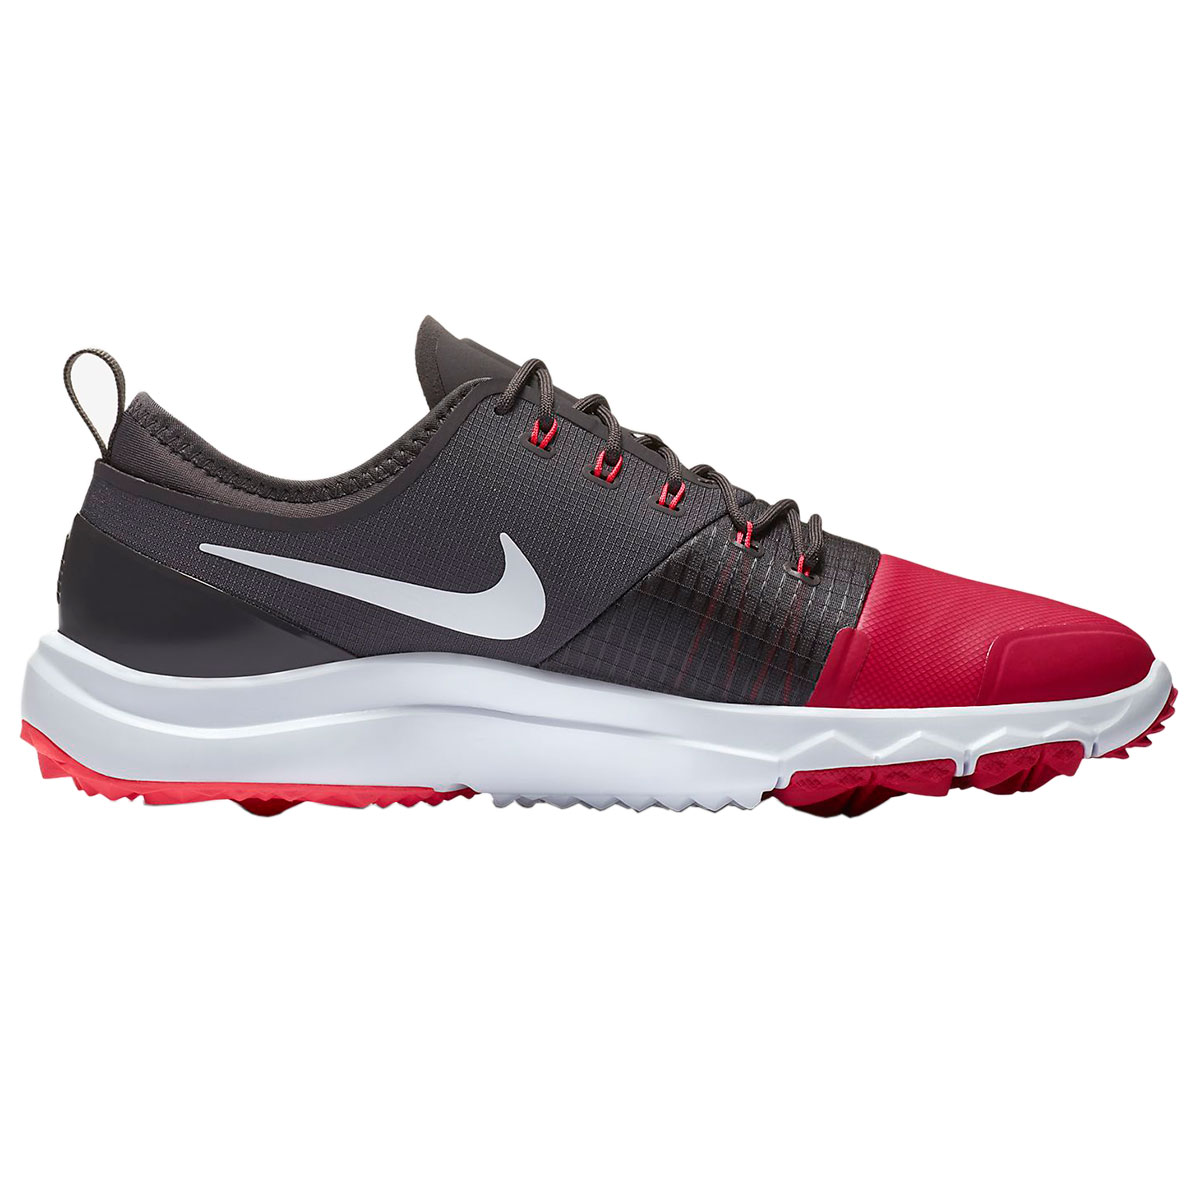 Nike Golf FI Impact 3 Ladies Shoes from 